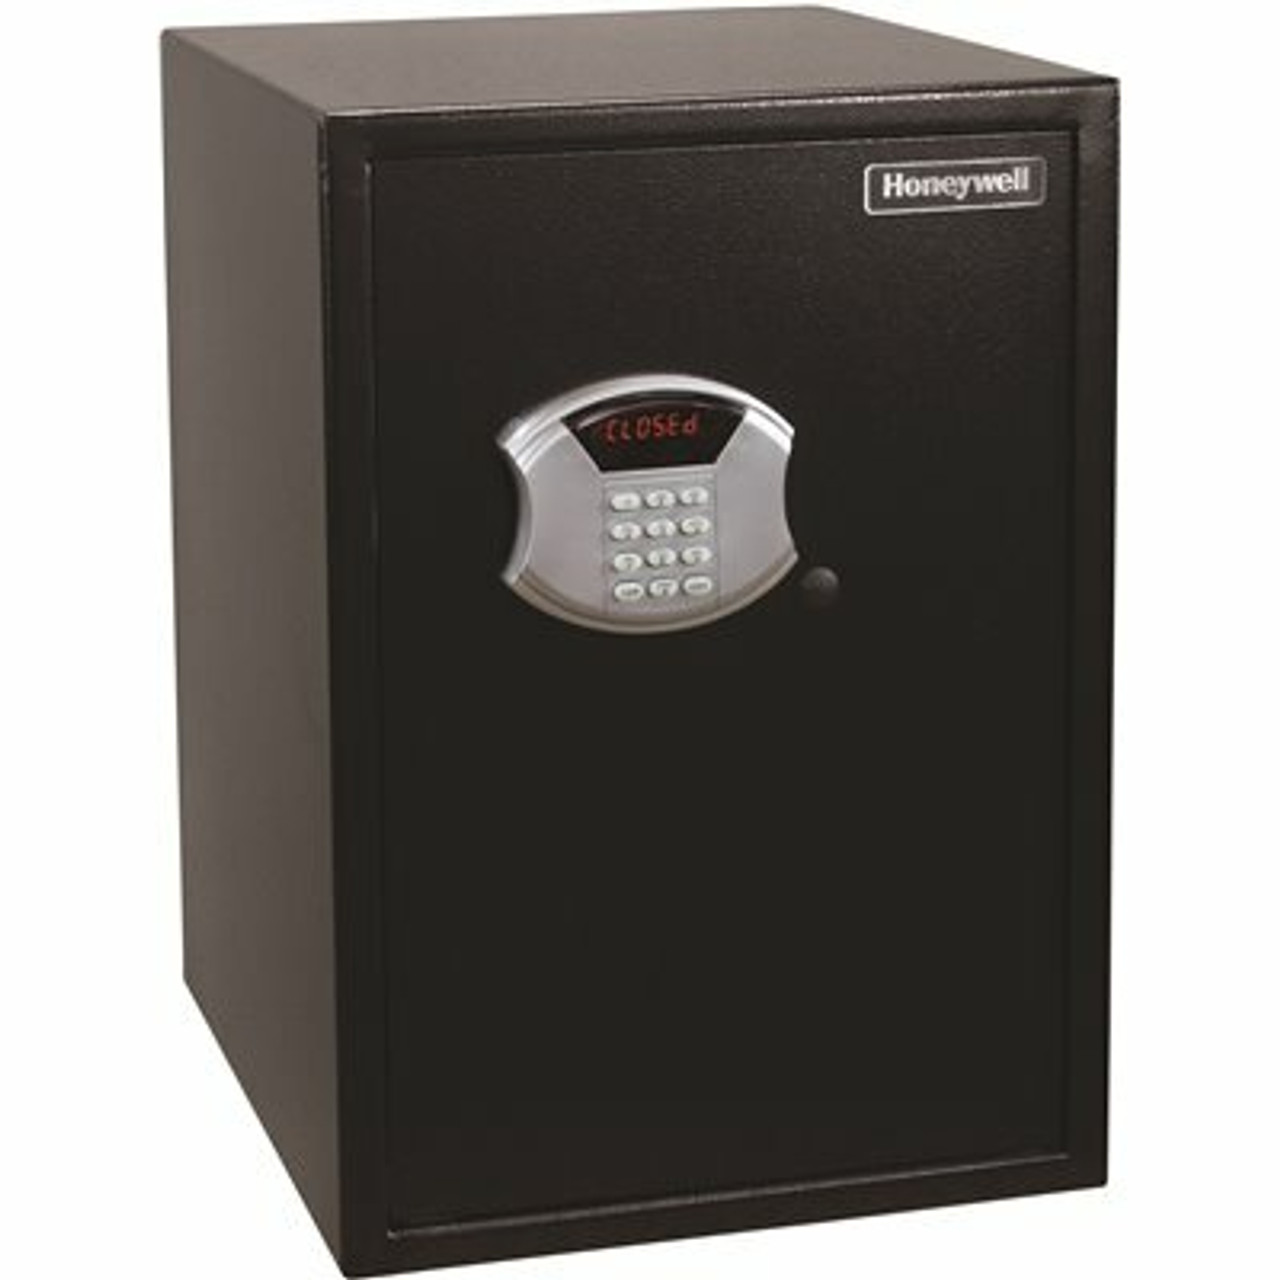 Honeywell 2.87 Cu. Ft. Large Storage Capacity Steel Security Safe With Programmable Digital Lock